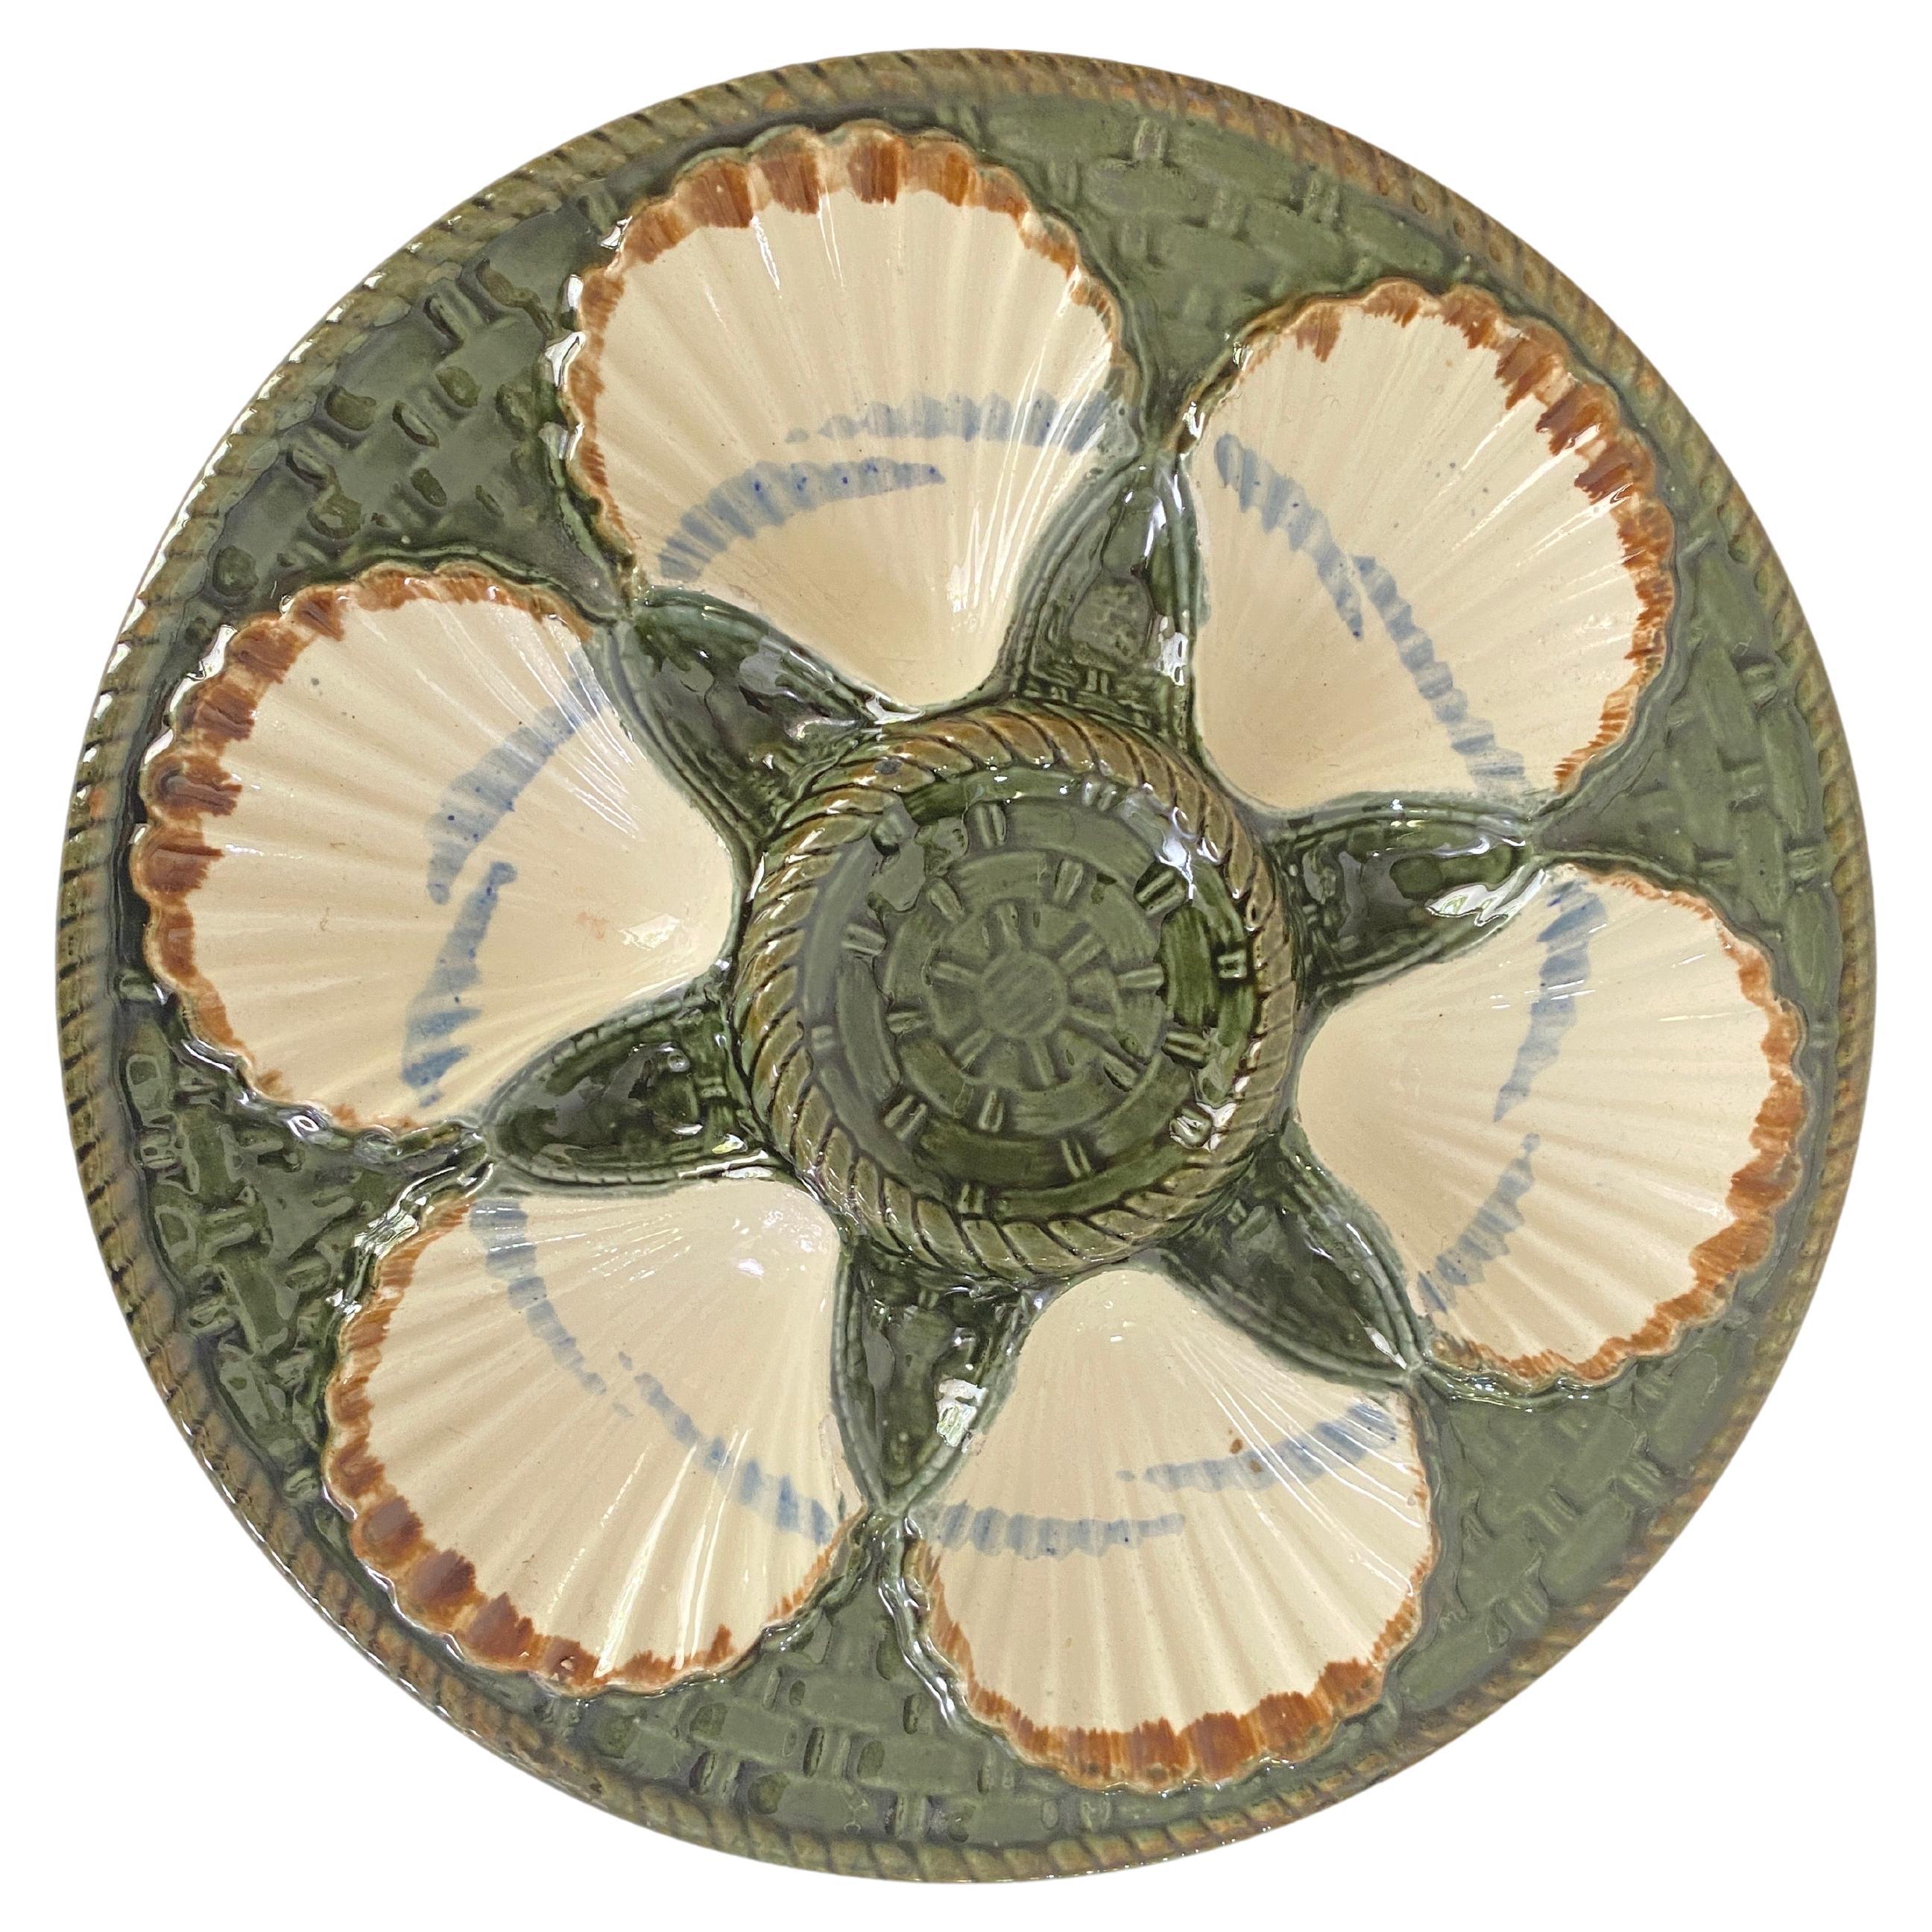 Oyster Plate in Majolica Green and White Color 19th Century Longchamp France